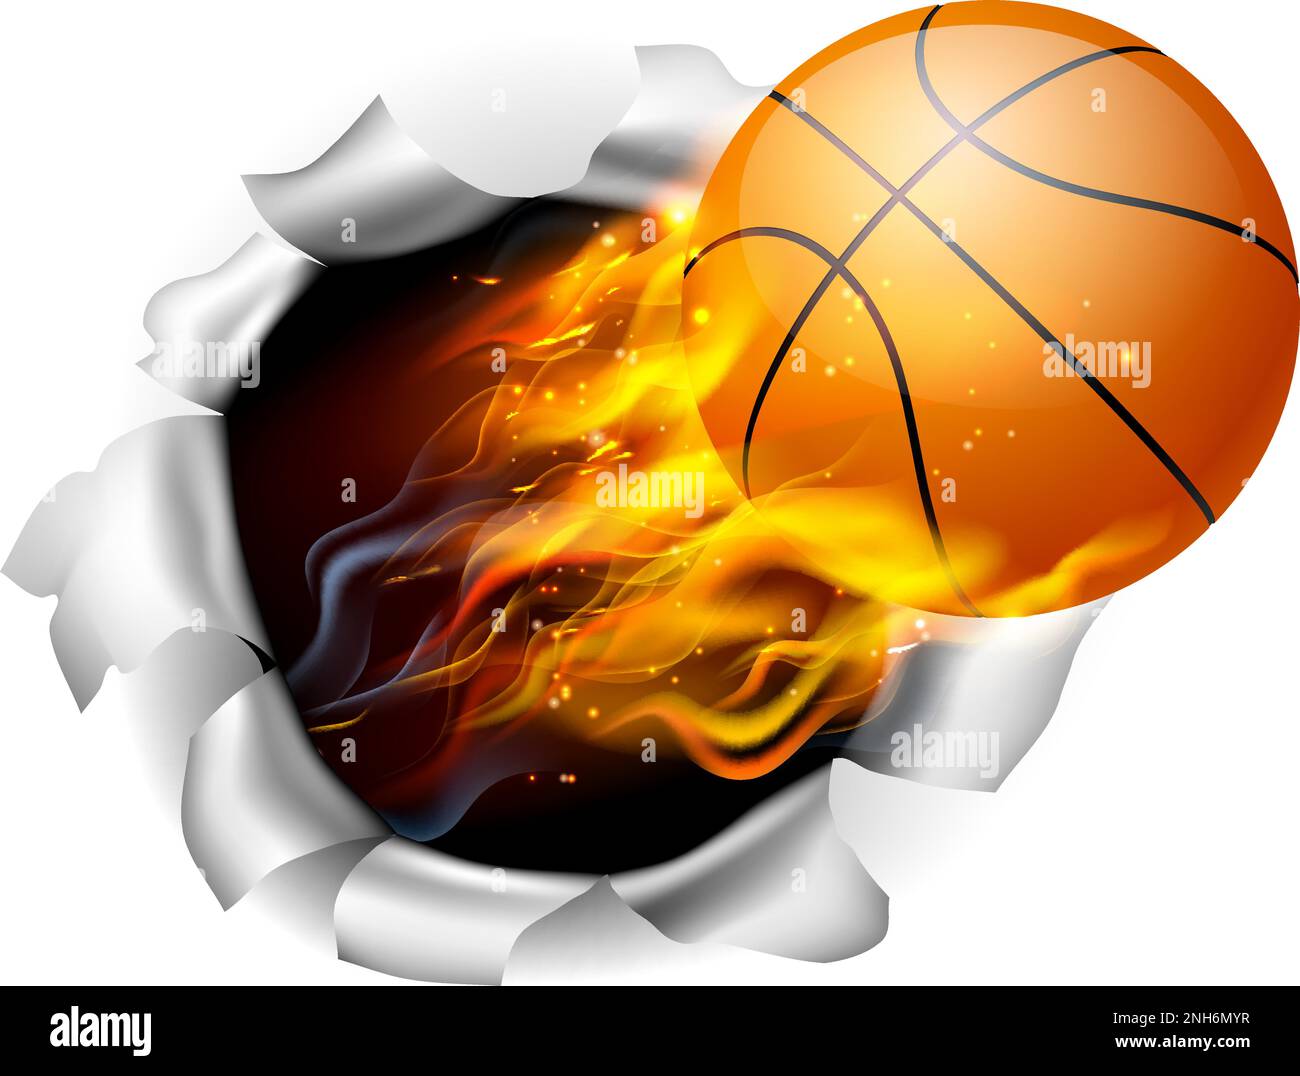 Basketball Ball Flame Fire Breaking Background Stock Vector